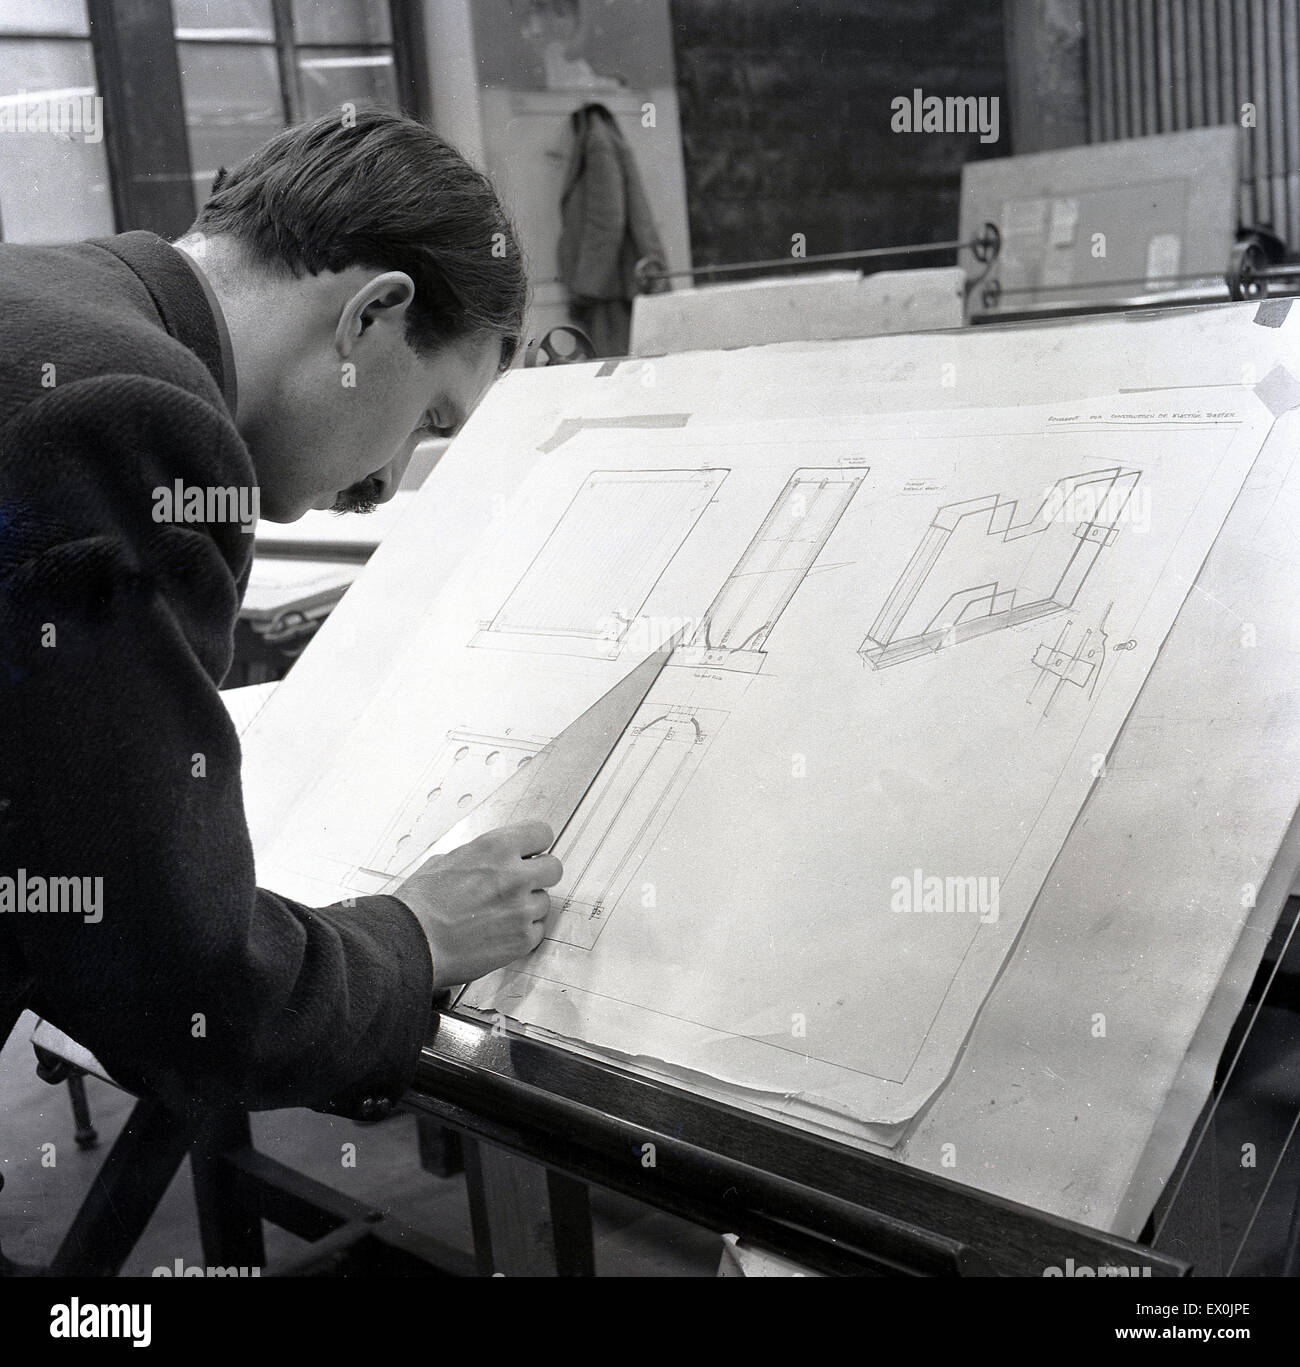 Historical, 1950s, male draughtsman at work Stock Photo: 84837270 - Alamy